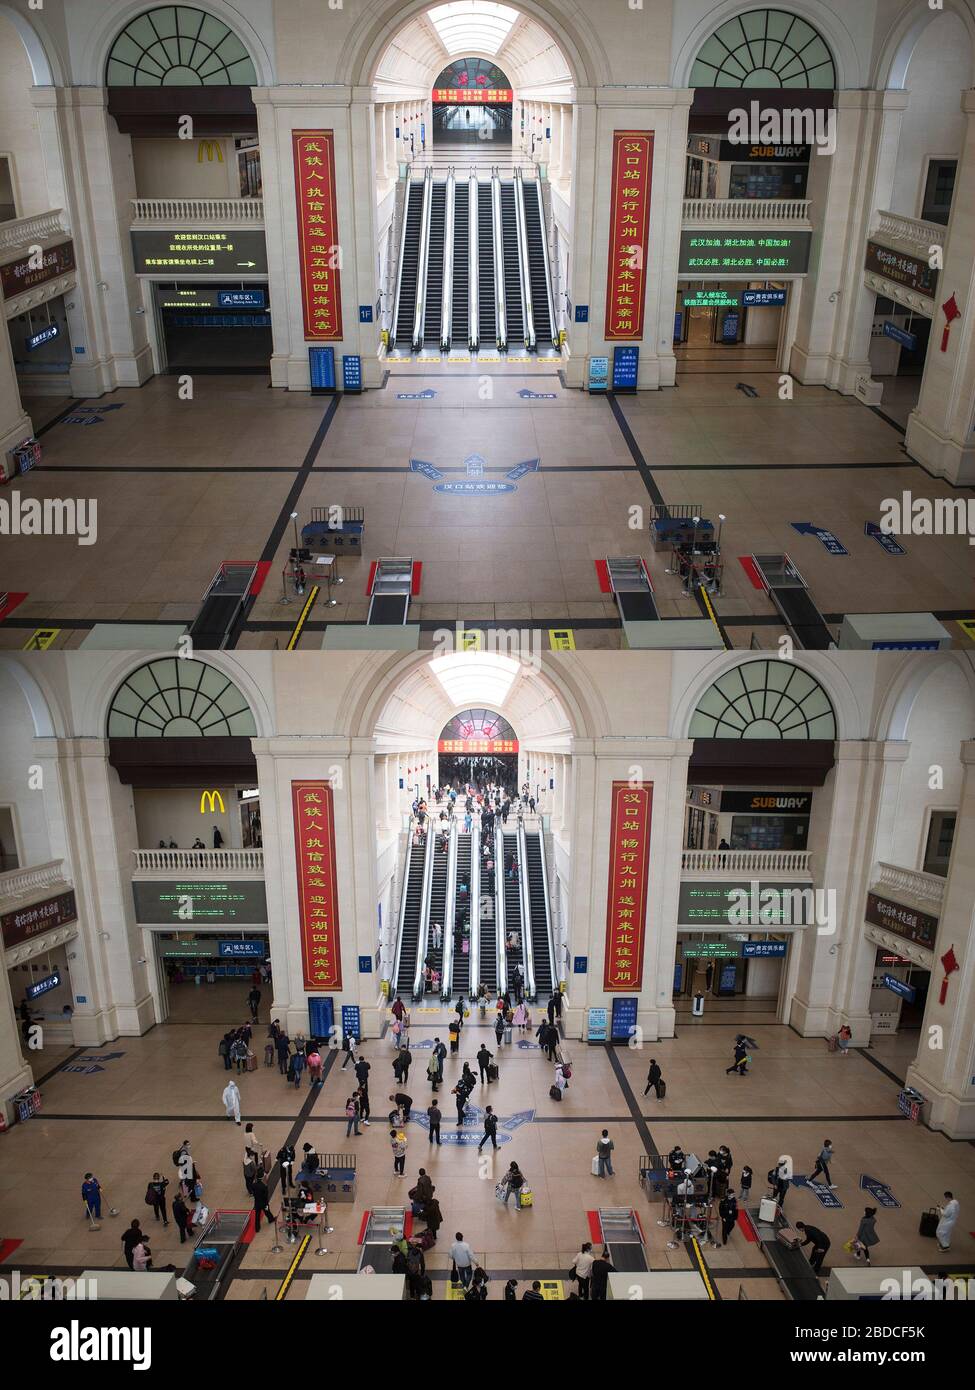 (200408) -- WUHAN, April 8, 2020 (Xinhua) -- Combo photo shows the view of the entrance hall of the Hankou Railway Station in Wuhan, central China's Hubei Province on April 7, 2020 (upper) and on April 8, 2020.  With long lines of cars streaming through expressway tollgates and masked passengers boarding trains, the megacity of Wuhan in central China lifted outbound travel restrictions on Wednesday after almost 11 weeks of lockdown imposed to stem the COVID-19 outbreak (Xinhua/Xiao Yijiu) Stock Photo